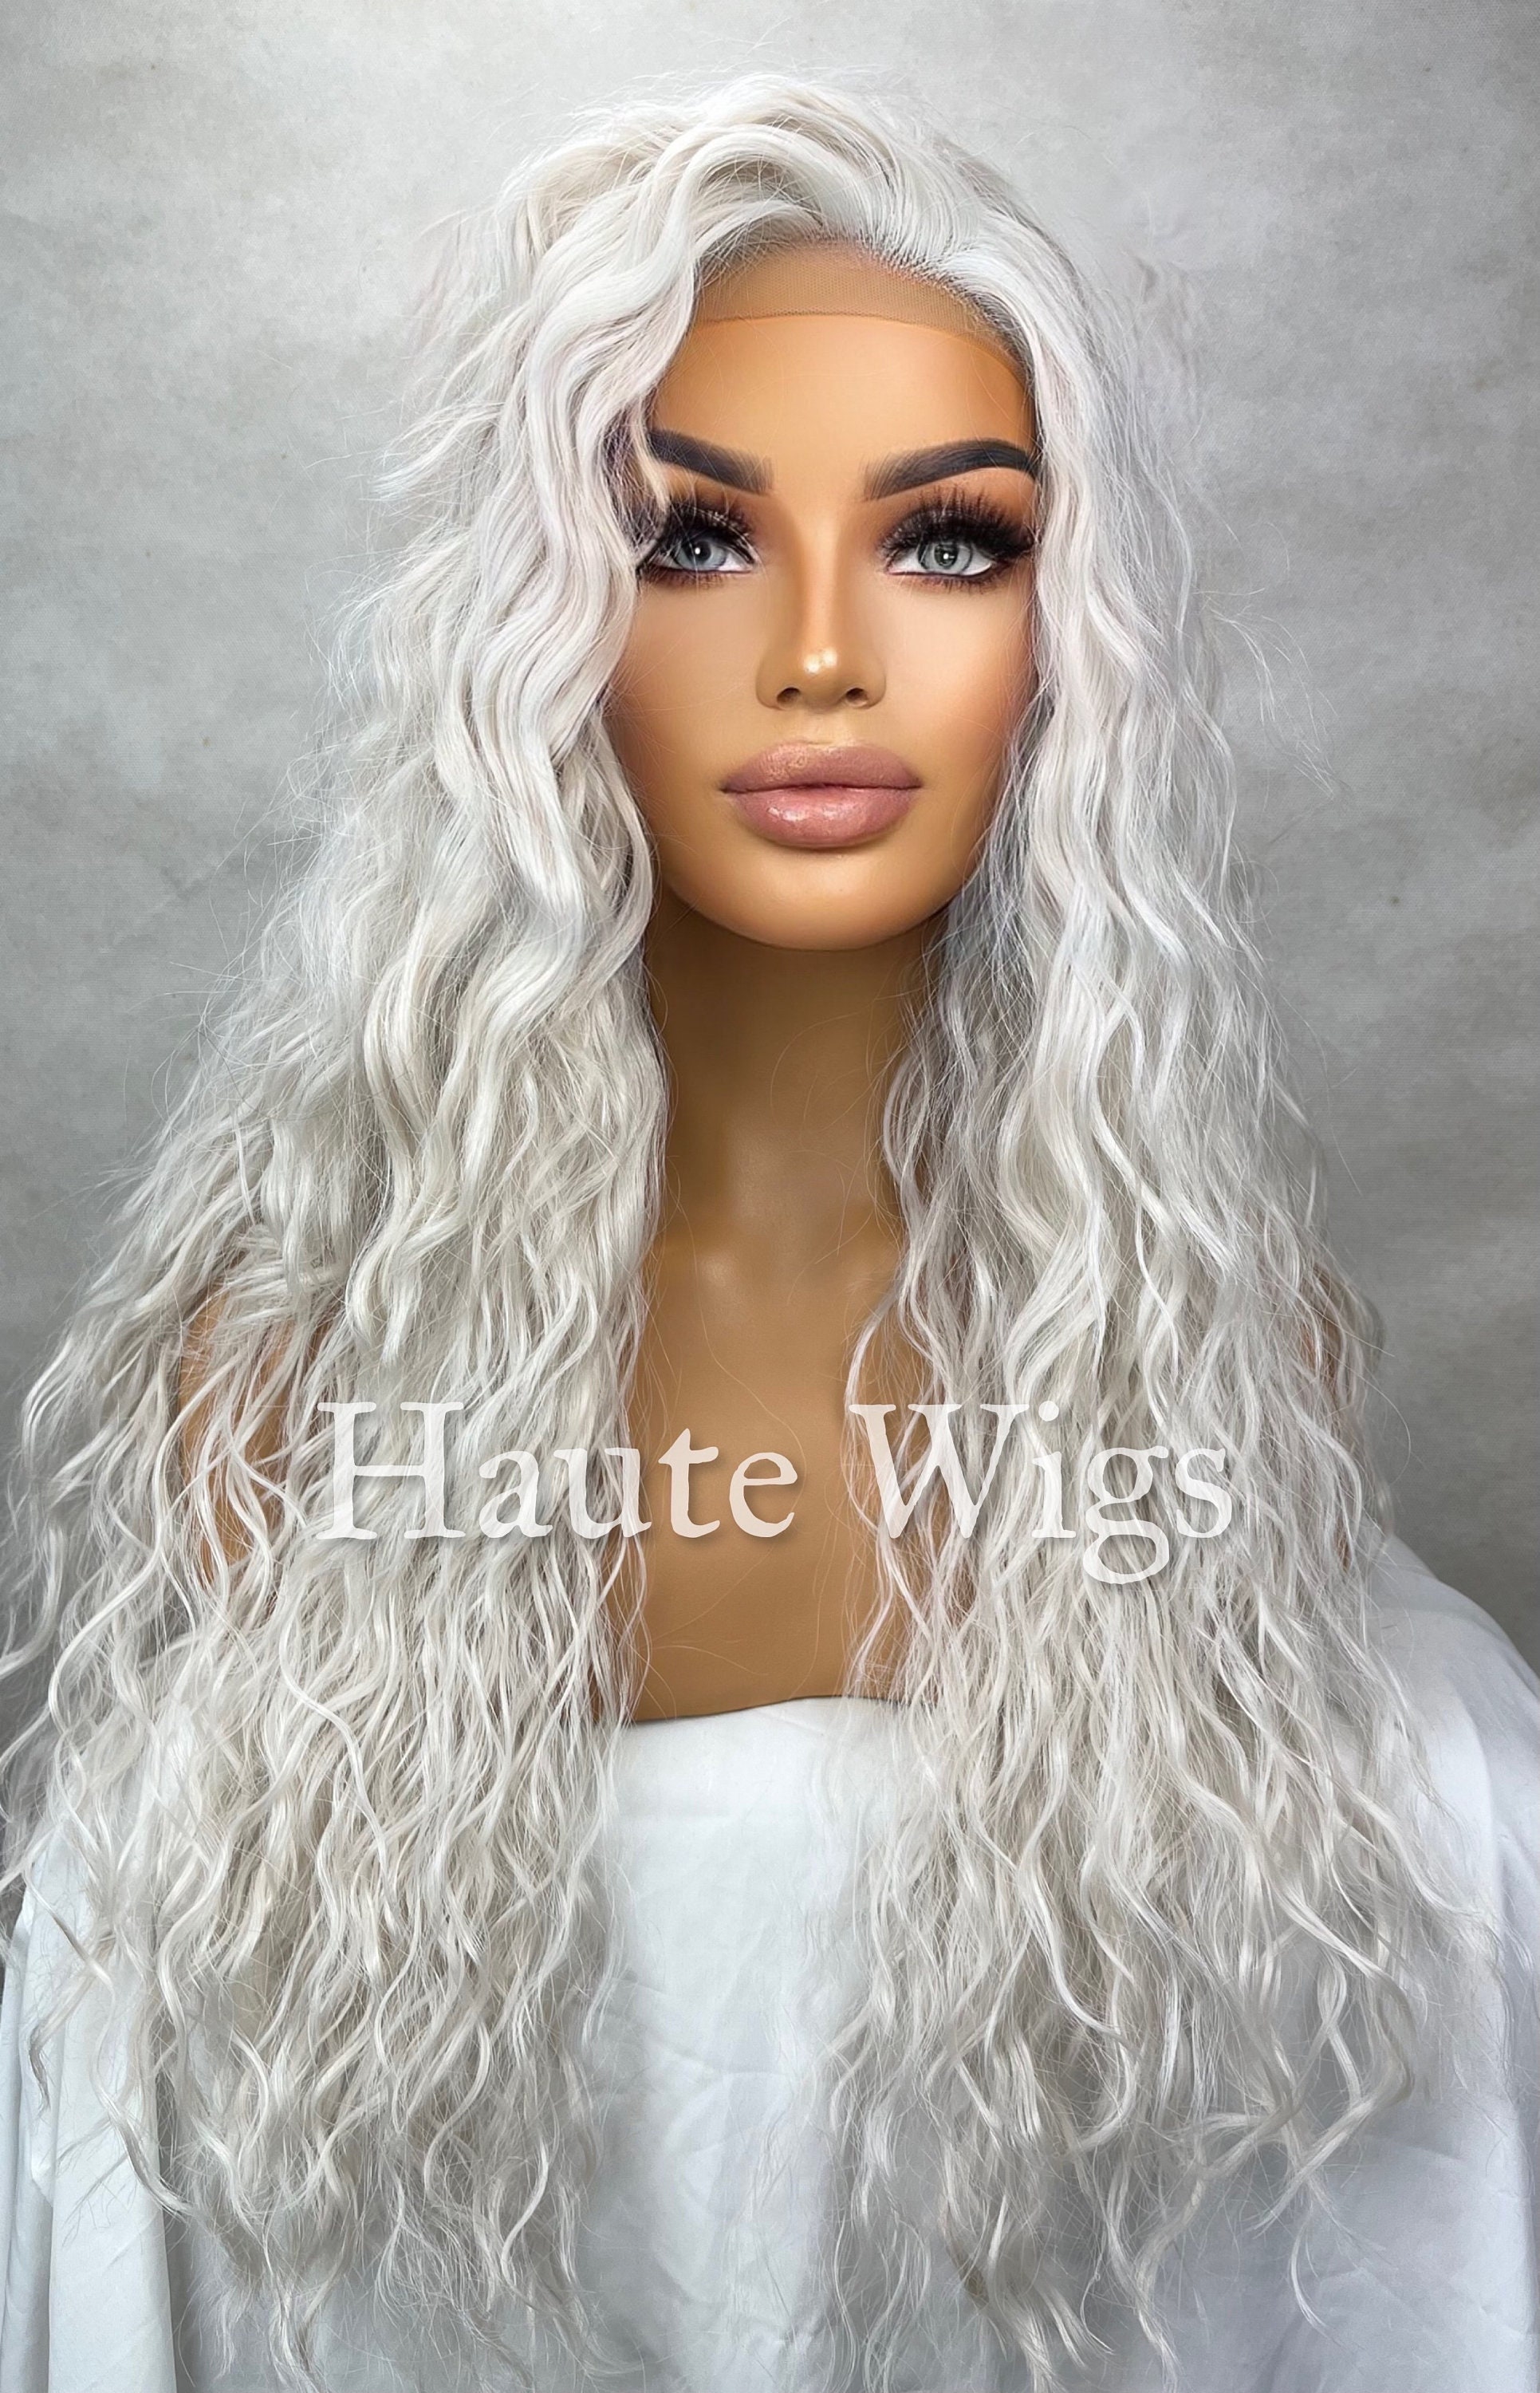 26 inch Lace Wig Center Part Long Curly Front Wig Human Glue Free Wig Natural Color Wavy Synthetic Fiber Wig Head Cover, Deep Wavy Lace Front Wig